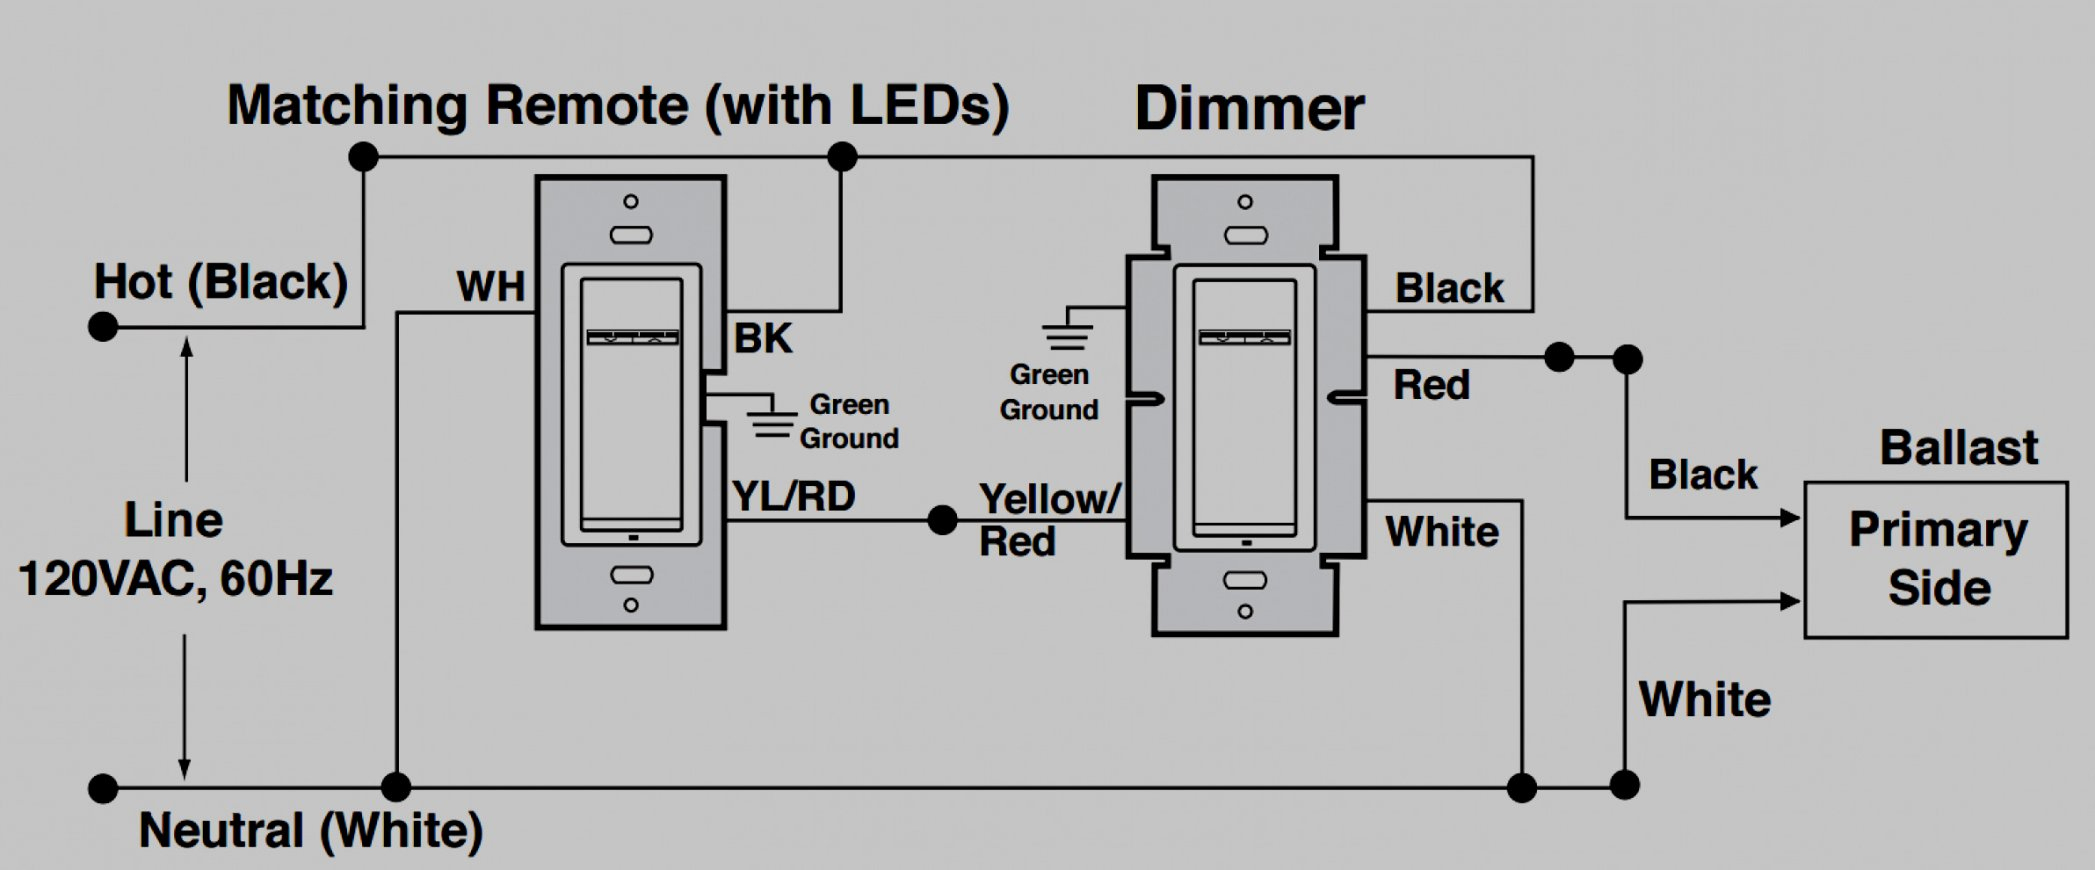 S2L Lutron Dimmer Switch Wiring Diagram | Manual E-Books - 3 Way Dimmer Switches Wiring Diagram